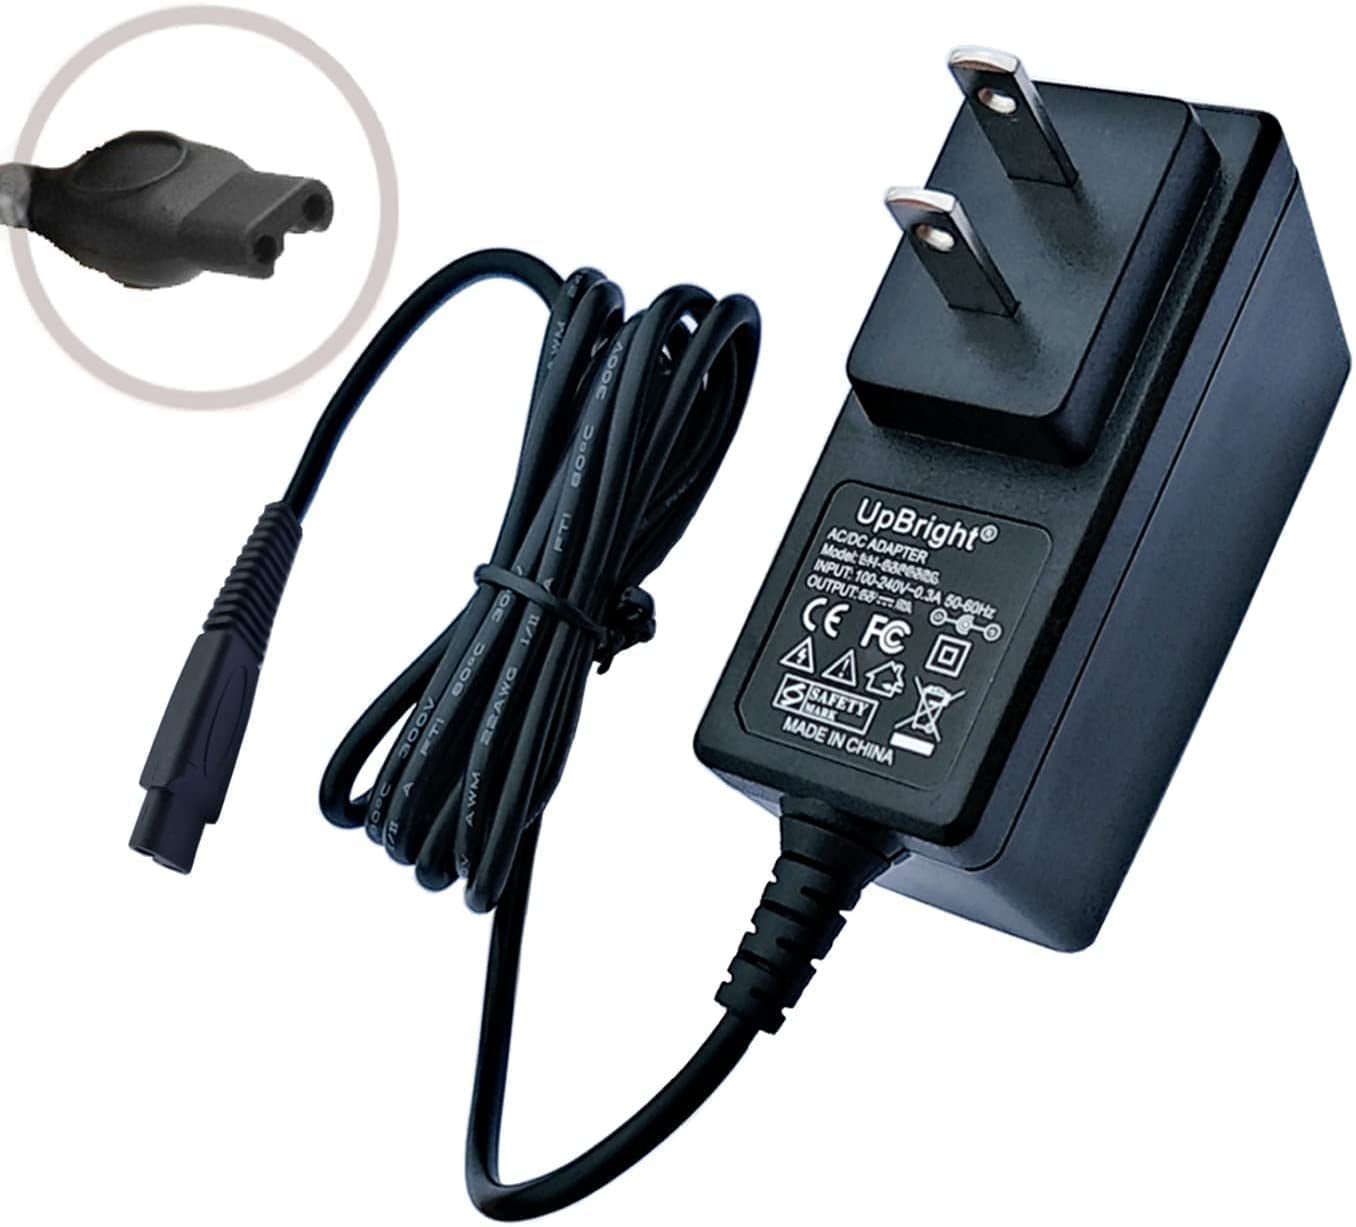 UpBright 15V Adapter Charger Compatible with Philips Norelco Oneblade Pro Trimmer Shaver 8900 QP6510 70 QP6520 QP6505 QP6620 HQ8505 D HQ8500 HQ6885 QP2530 QP2630 HQ850 AquaTouch S5420 SSW-1789US - Walmart.com